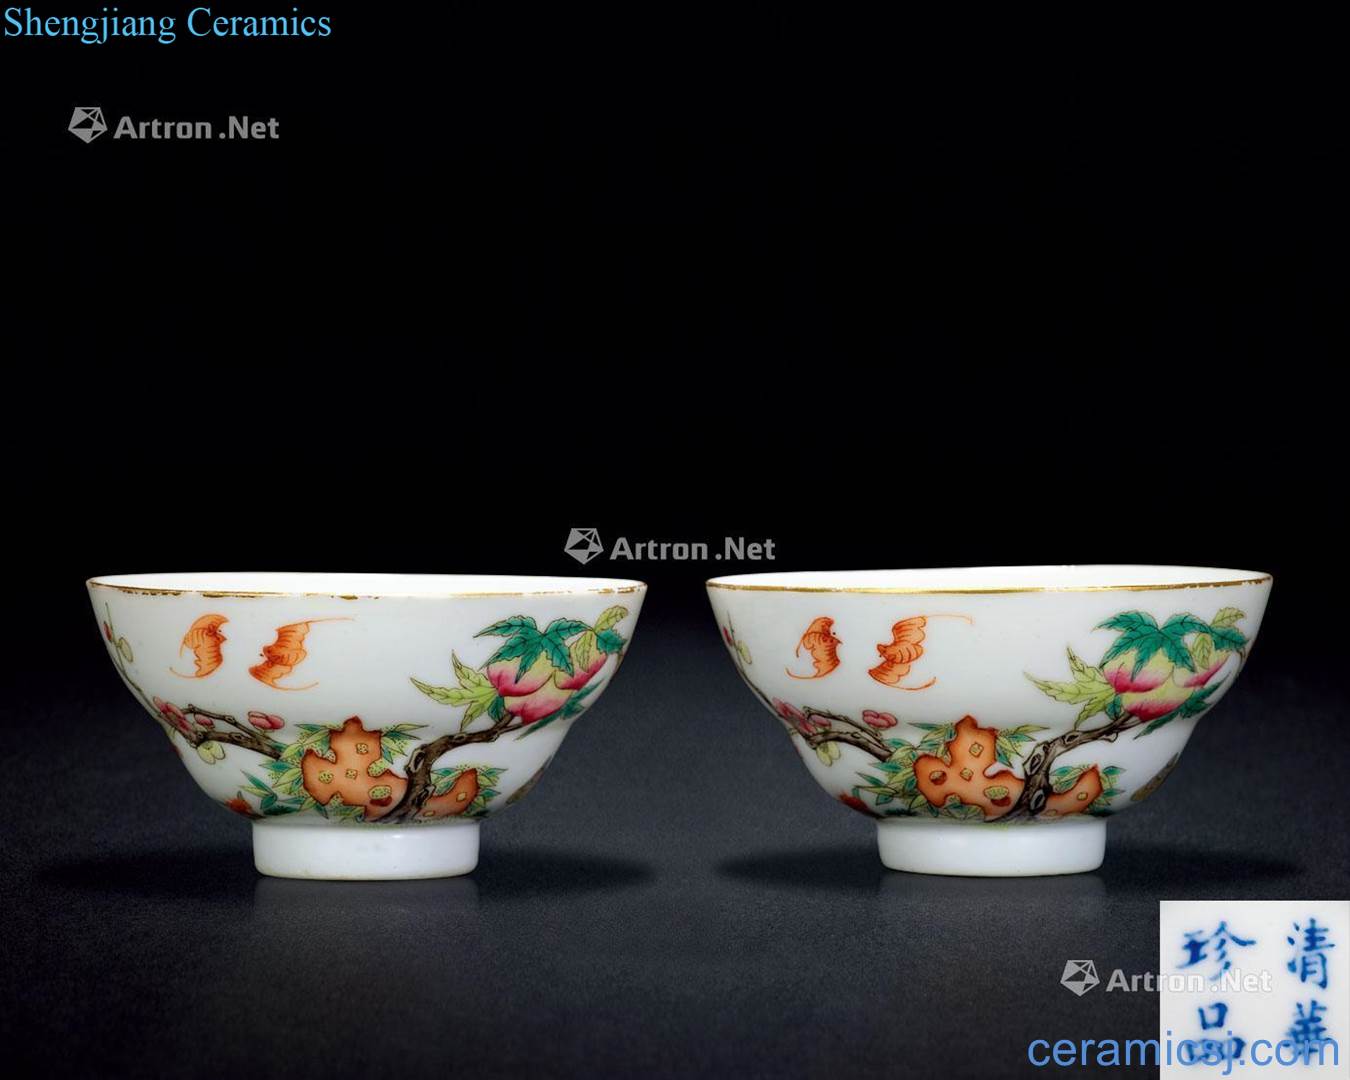 Pastel reign of qing emperor guangxu live lines or bowl (a)